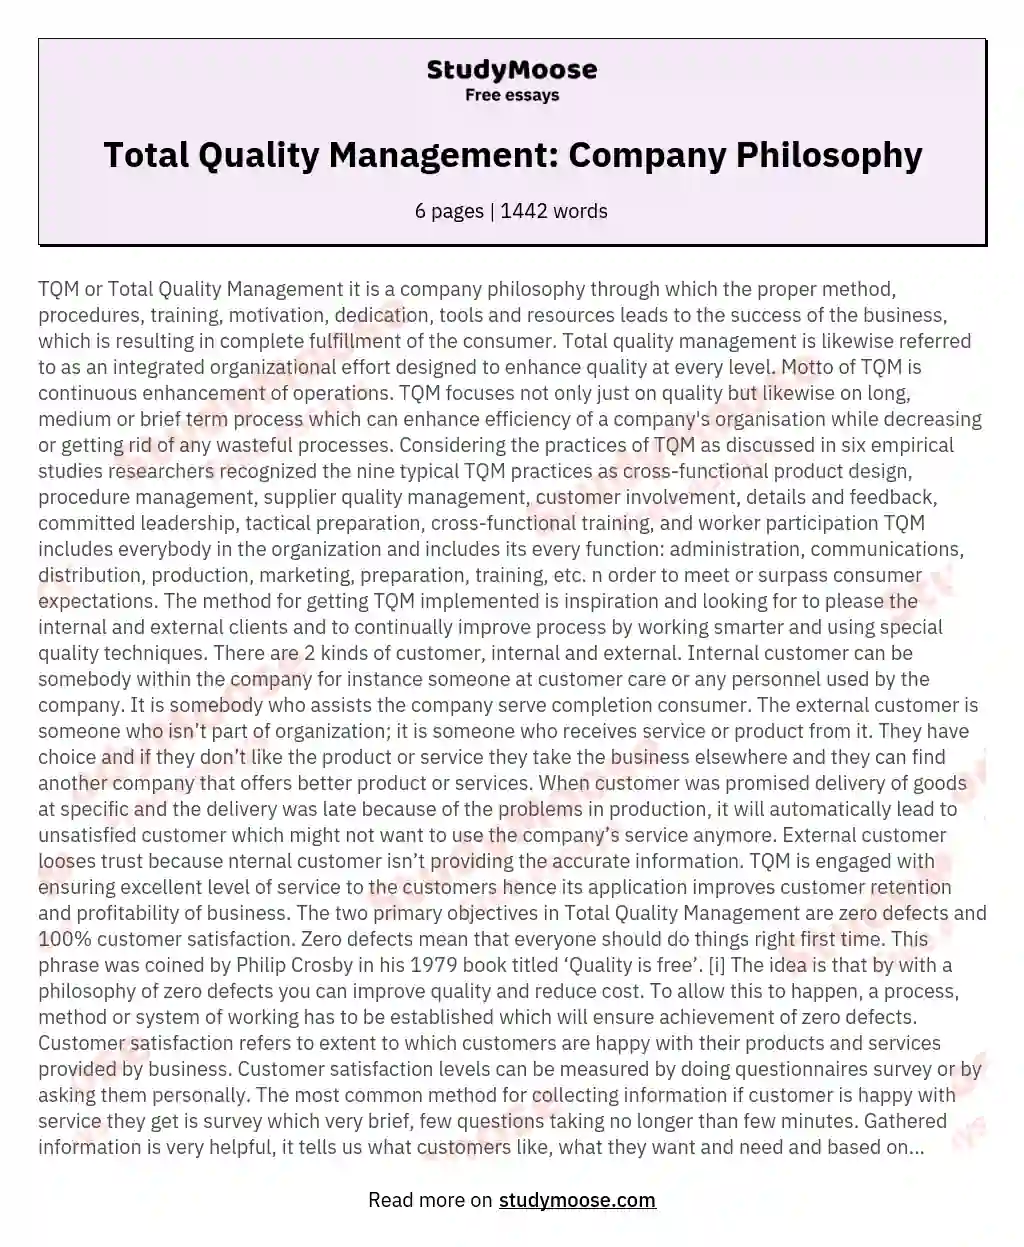 Total Quality Management: Company Philosophy essay